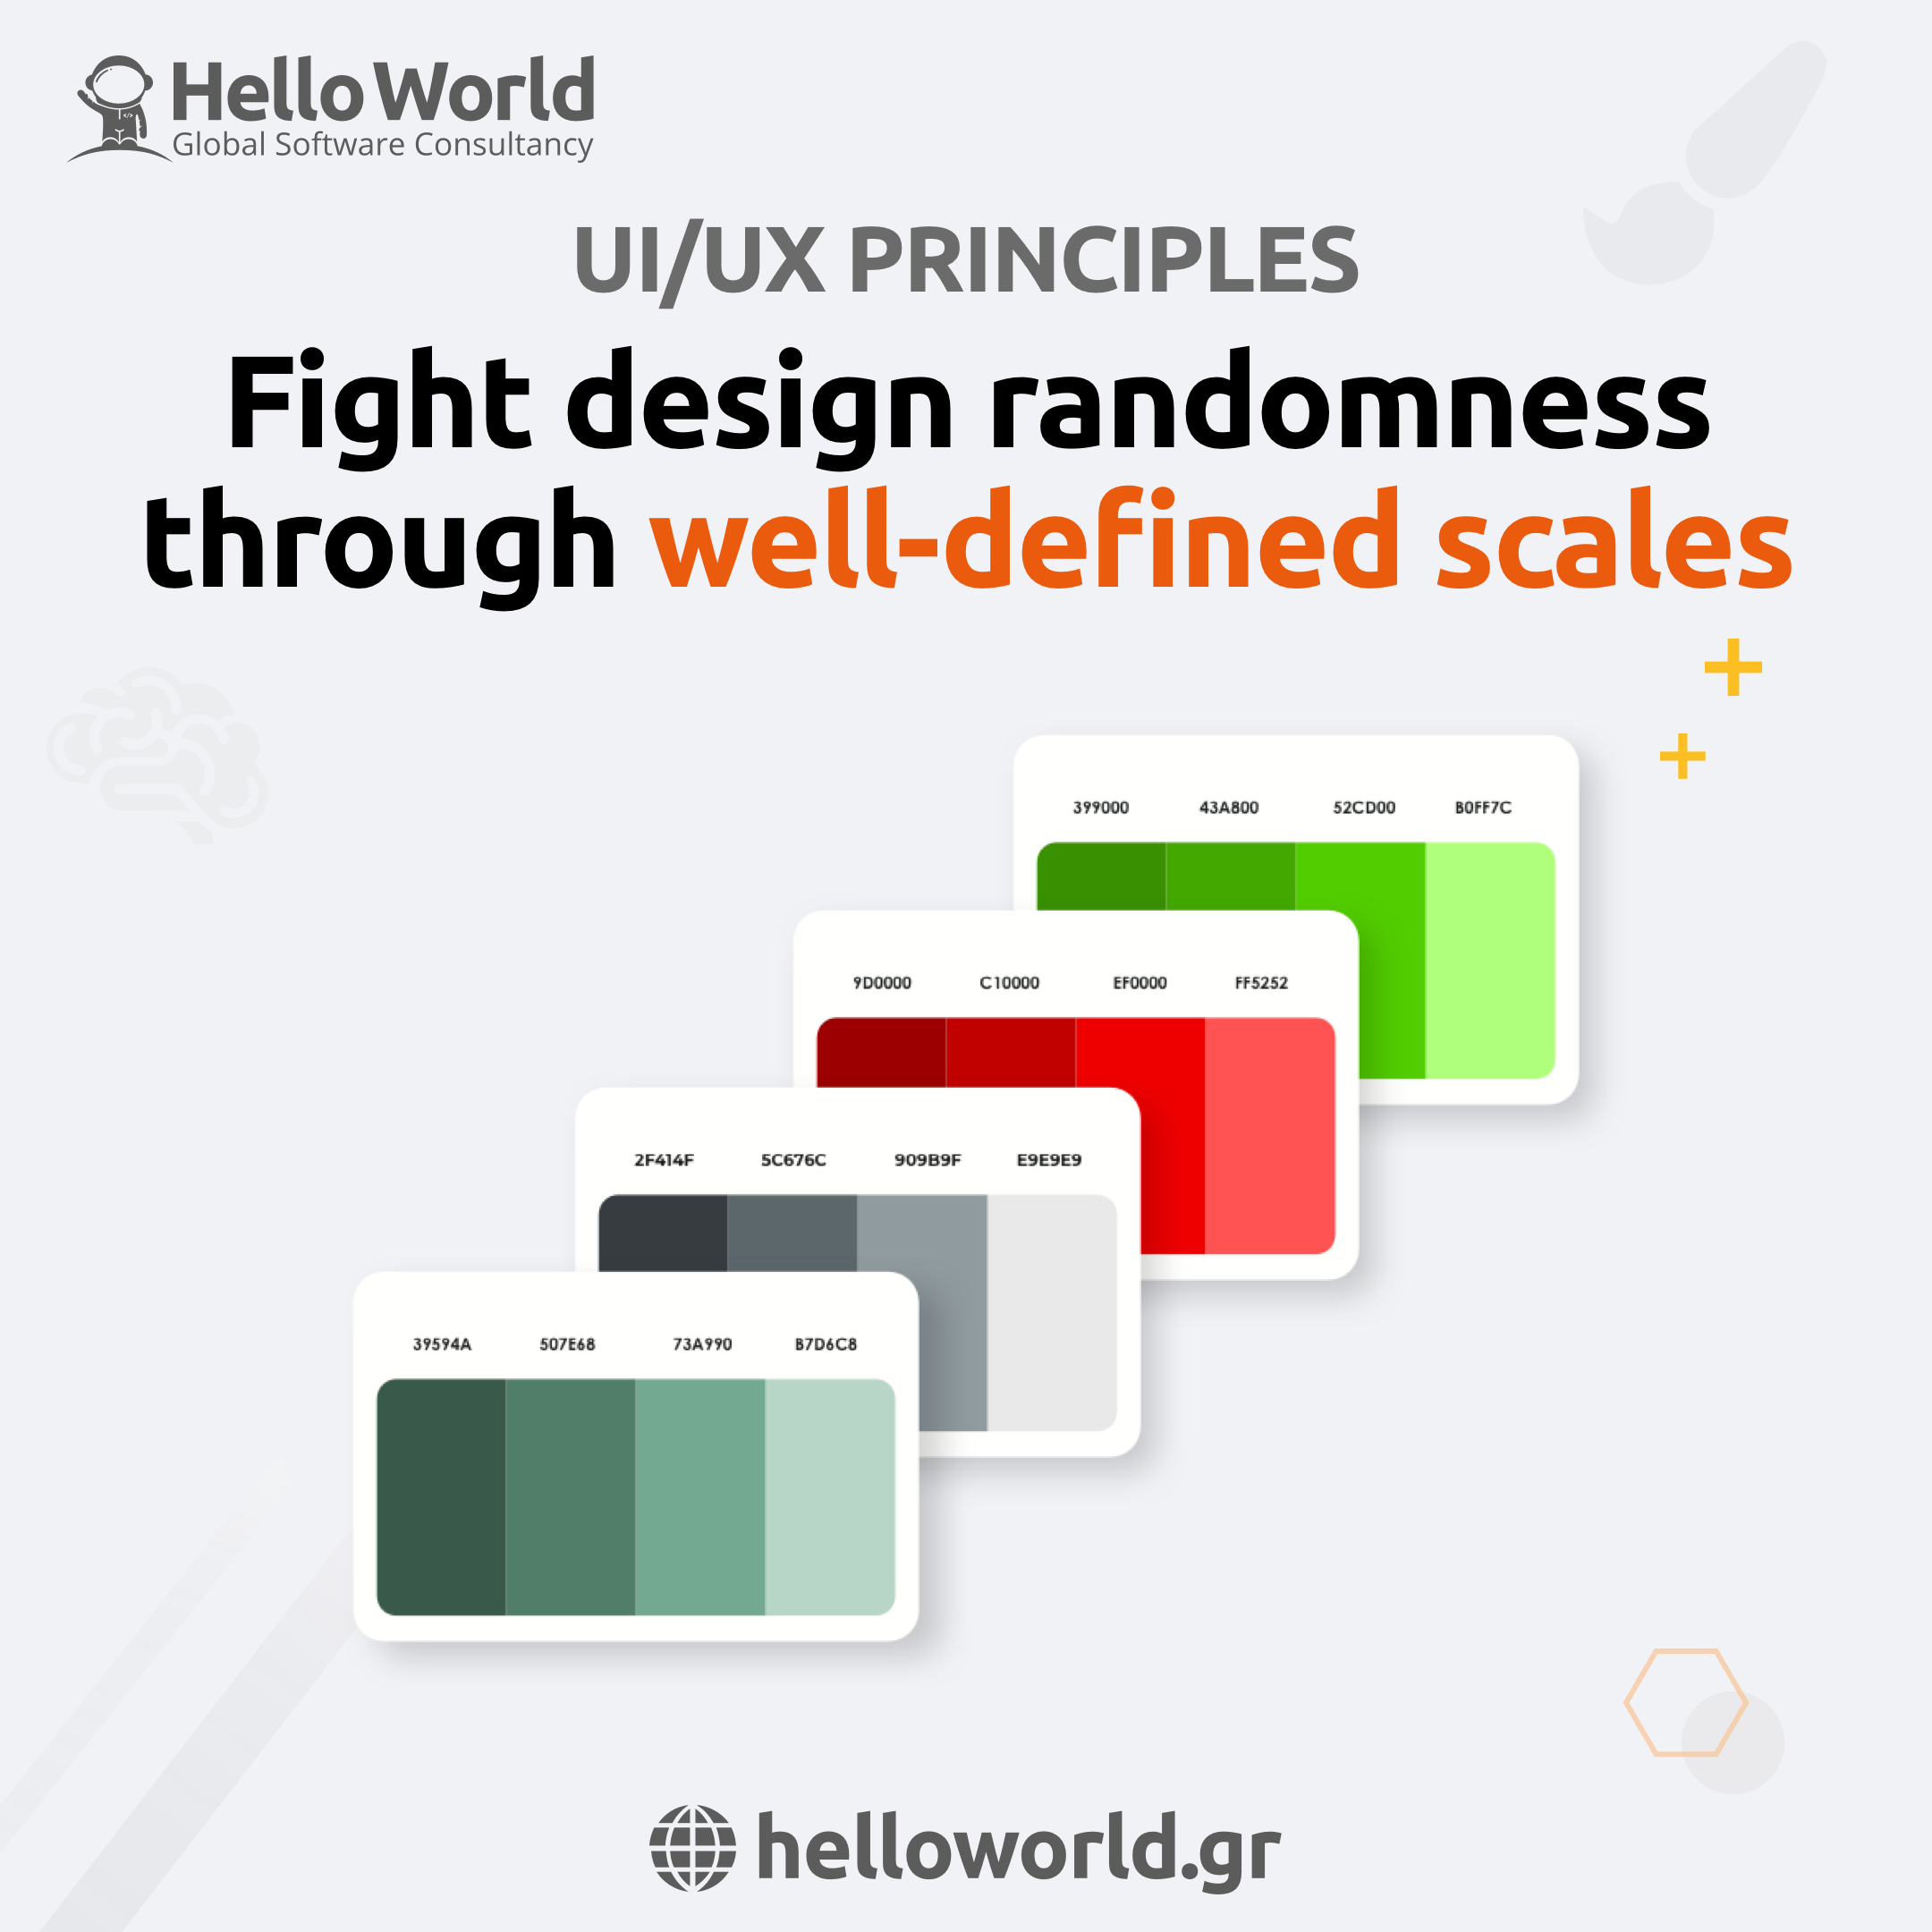 Fight design randomness through well-defined scales